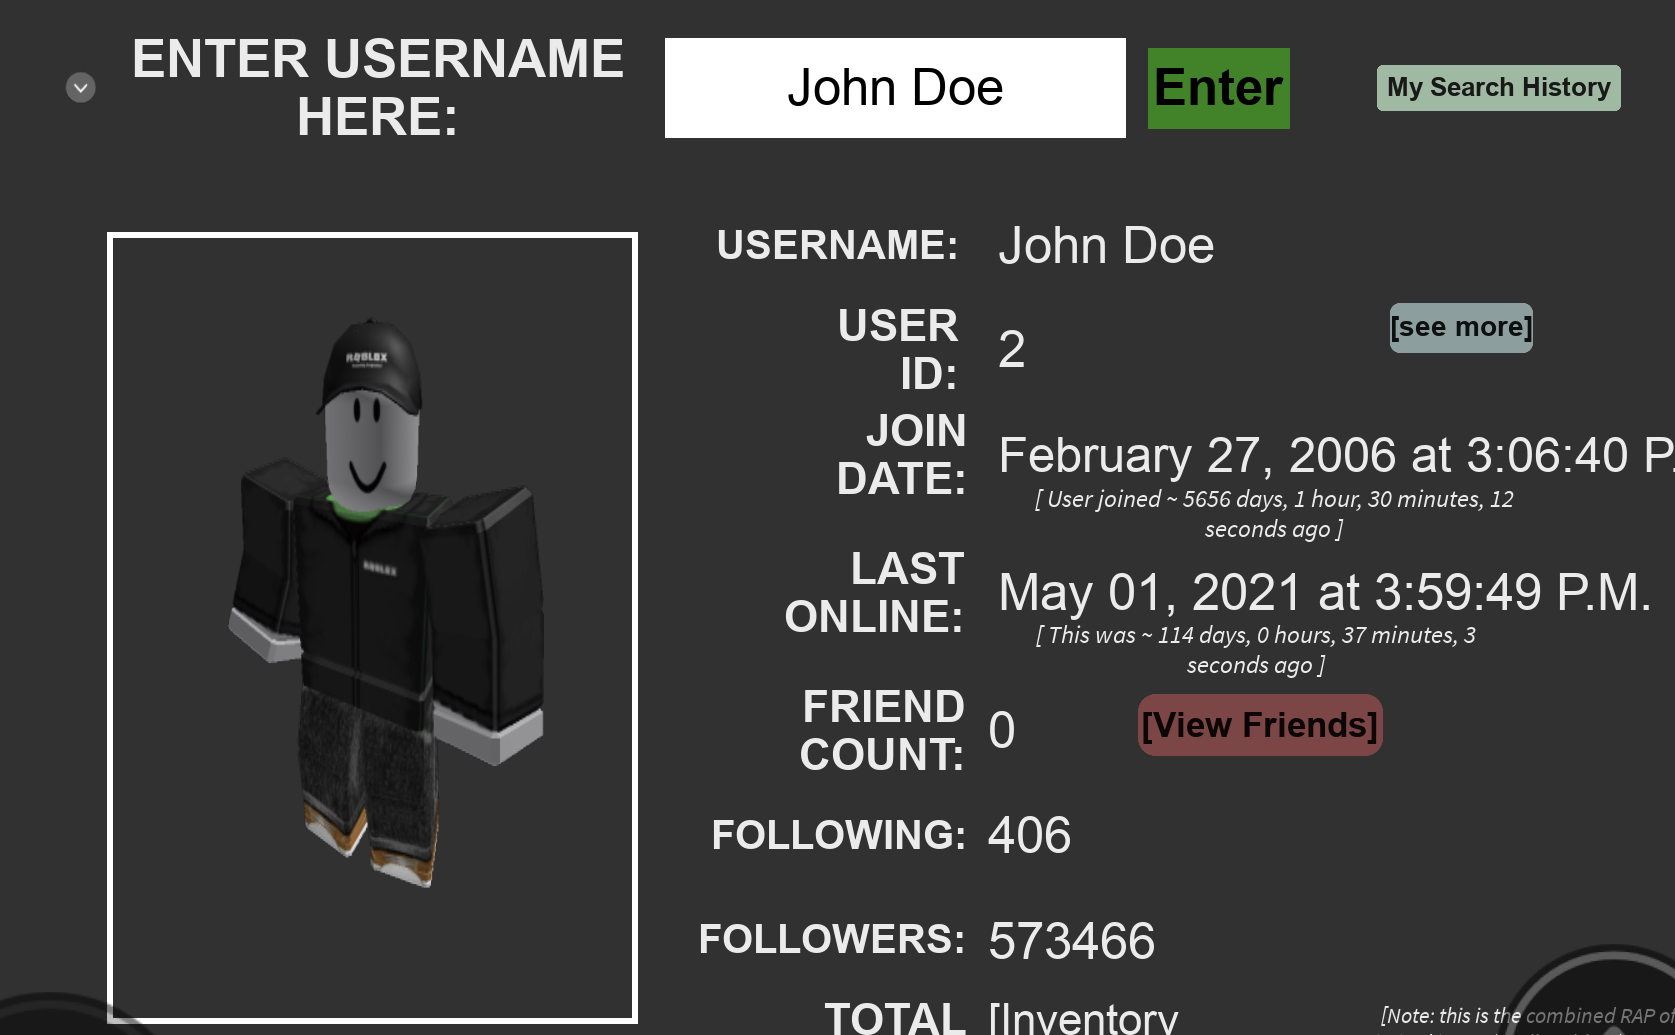 JOHN DOE IS BACK IN ROBLOX TO HACK US ALL!! 